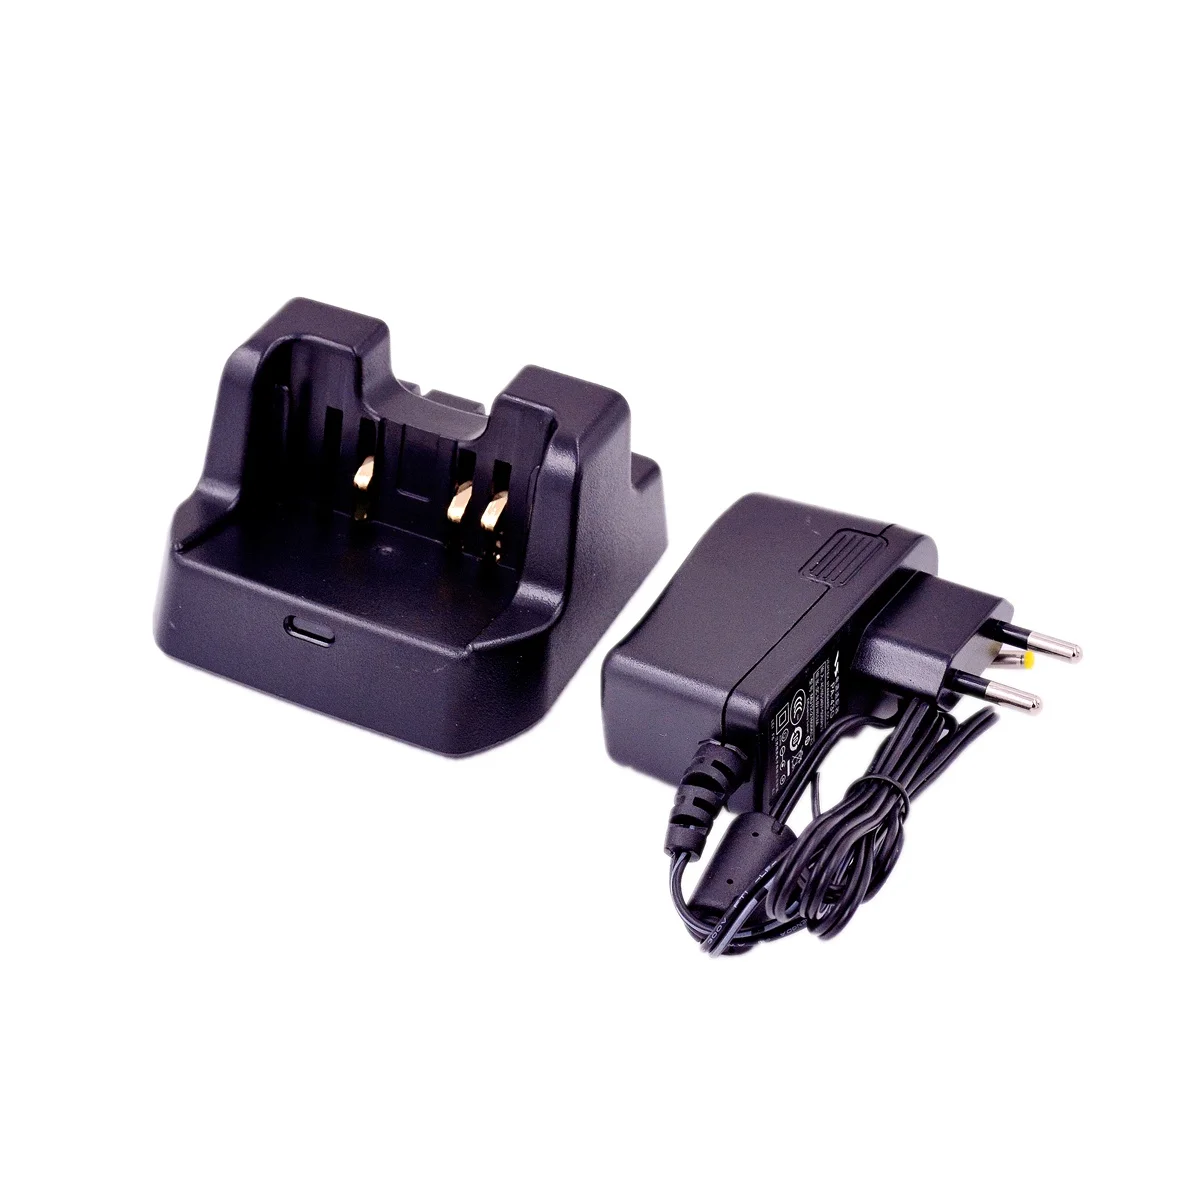 Desktop Rapid Charger Base CD41 & AC Plug Adapter for Yaesu VX 8GR 8DR FT 1DR 1XDR 2DR 3DR FT5D Battery Power Supply Accessory